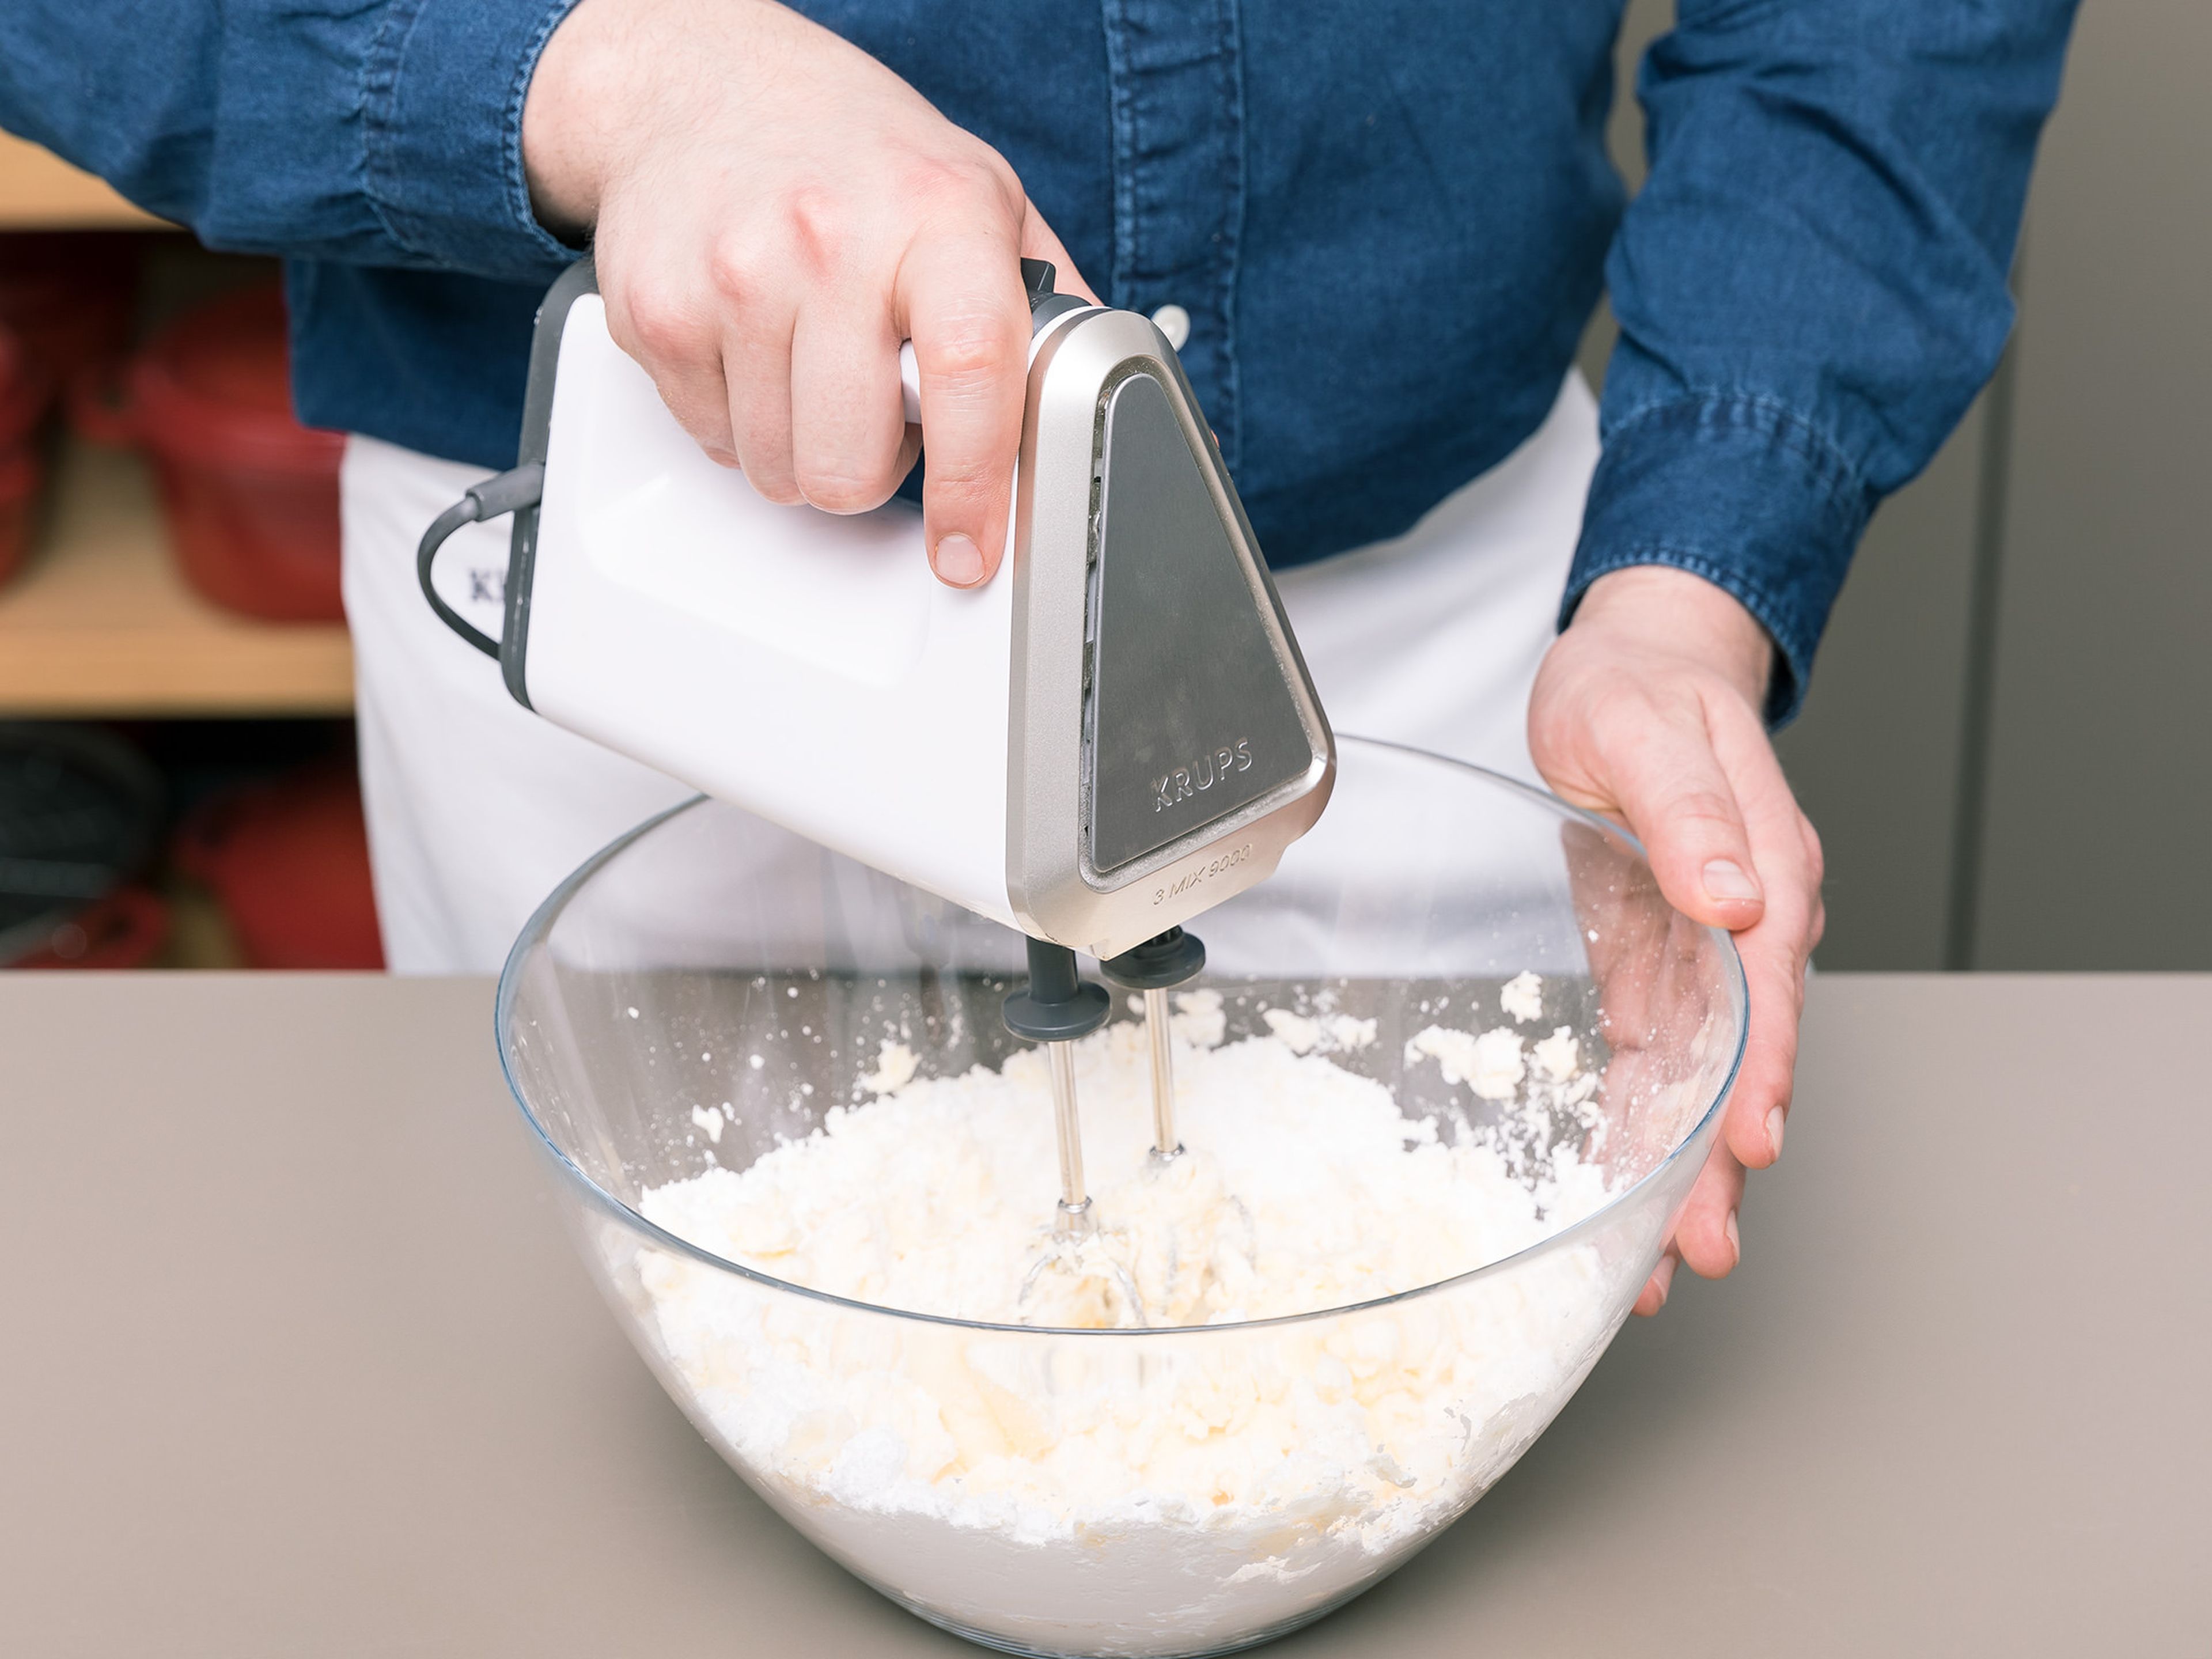 Preheat the oven to 175°C/350°F. Grease and flour a baking tin. In a large bowl, using a hand mixer beat most of the butter with most of the confectioner's sugar, half of the vanilla extract, and salt until fluffy. Beat in the eggs one by one. In a separate bowl, mix the flour with the baking powder. Gradually fold in part of the flour mix and the chamomile-infused milk to the butter mixture. Drain the soaked loose chamomile tea and add the leaves to the batter. Mix to combine.